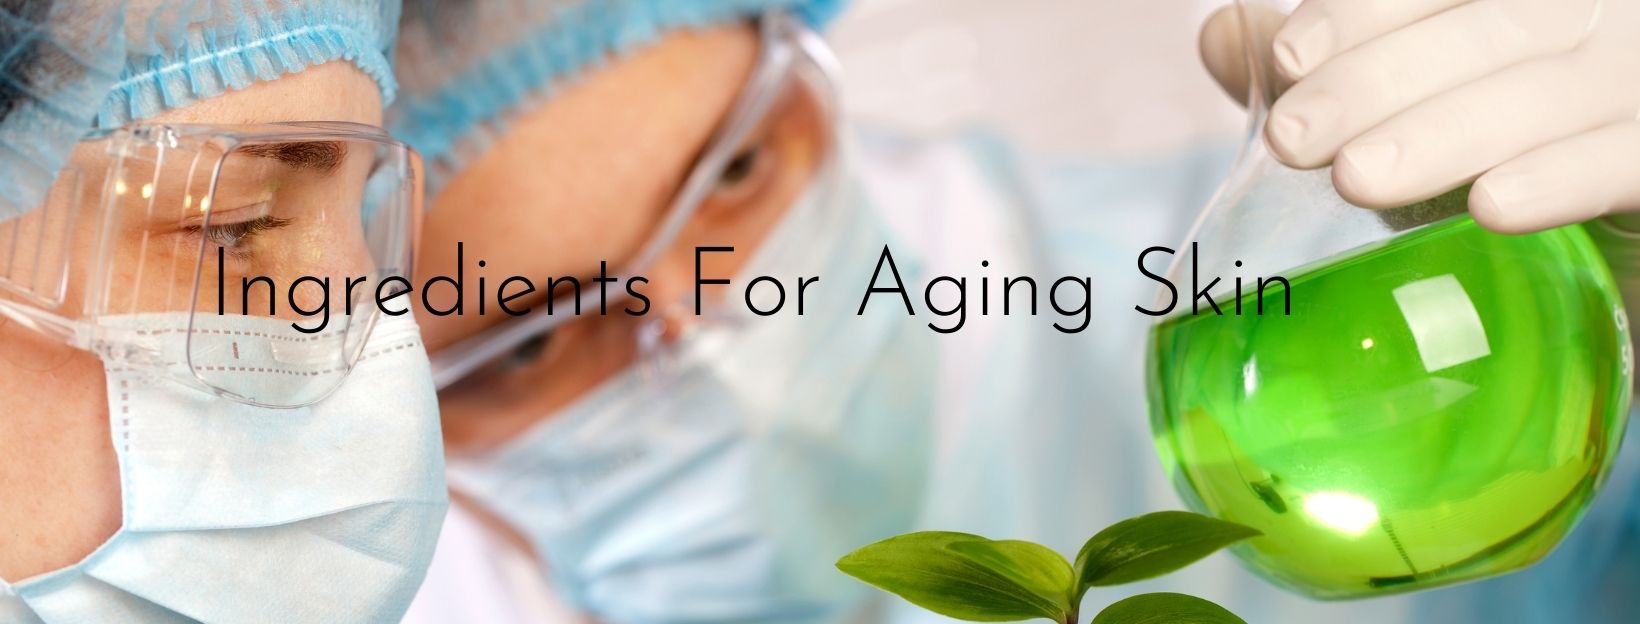 Effective Skin Care Ingredients For Aging Skin